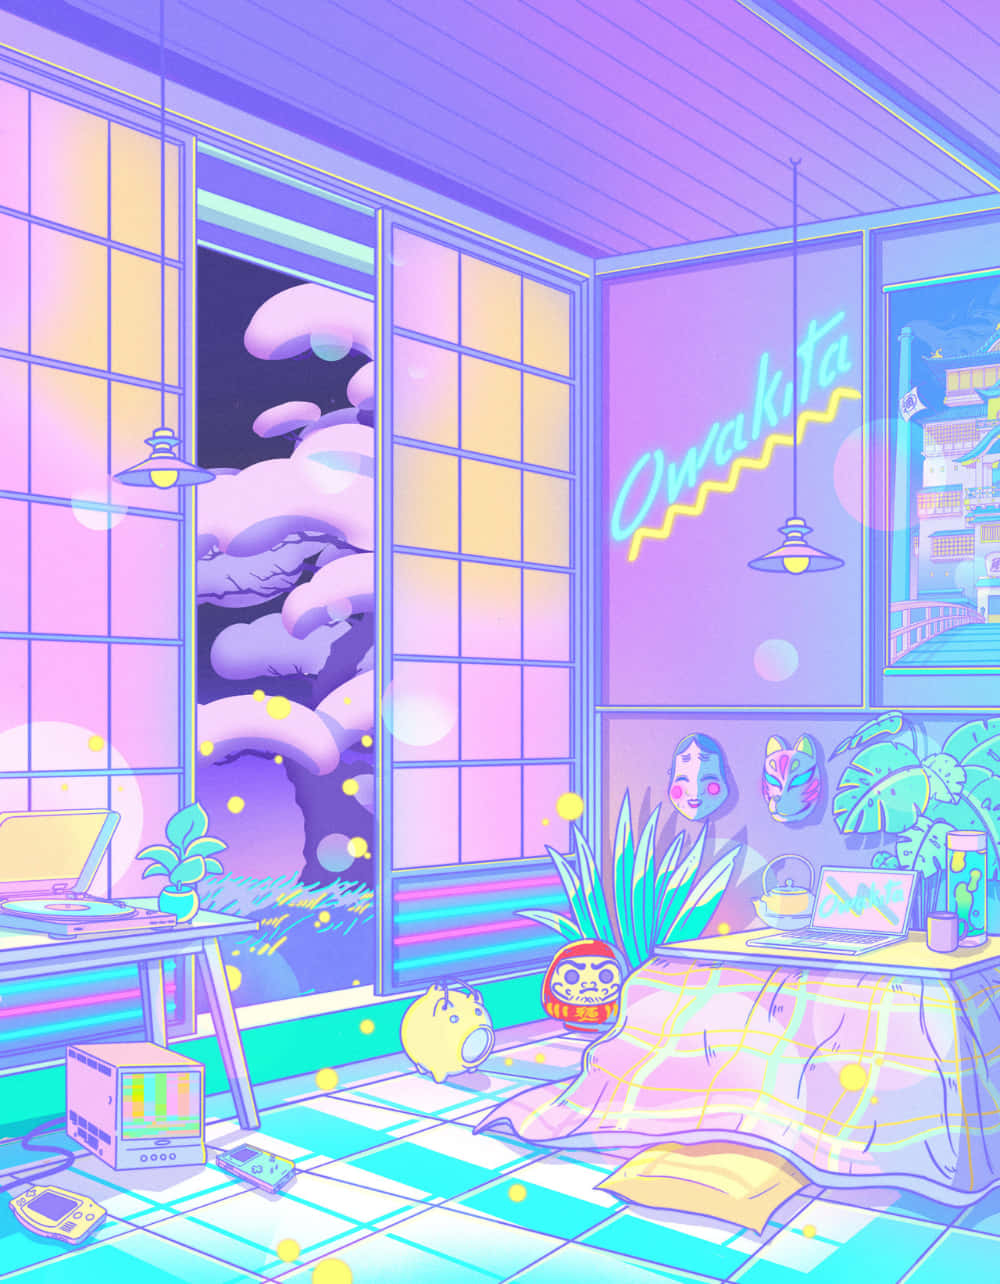 “Colorful Anime-inspired Living Room”